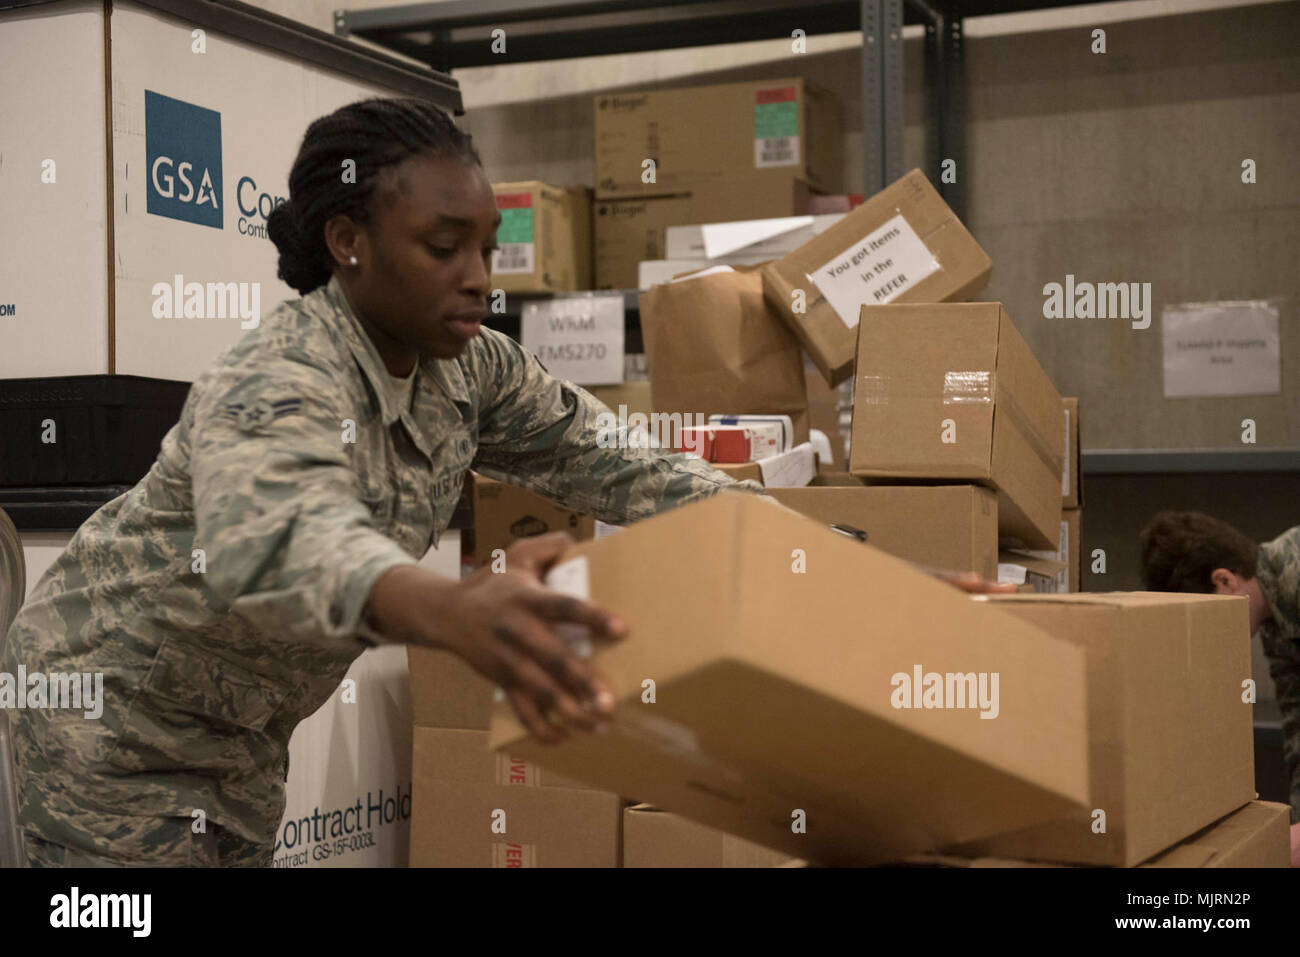 U.S. Air Force Airman 1st Class Ashley Cromwell, 18th Medical Group medical material technician, stacks boxes of medical supplies March 21, 2018, at Kadena Air Base, Japan. Medical materials go through the warehouse managed by the 18th MDG “Log Dogs” before being distributed throughout units both in and outside the medical group building. Armed Forces and civilians displaying courage bravery dedication commitment and sacrifice Stock Photo